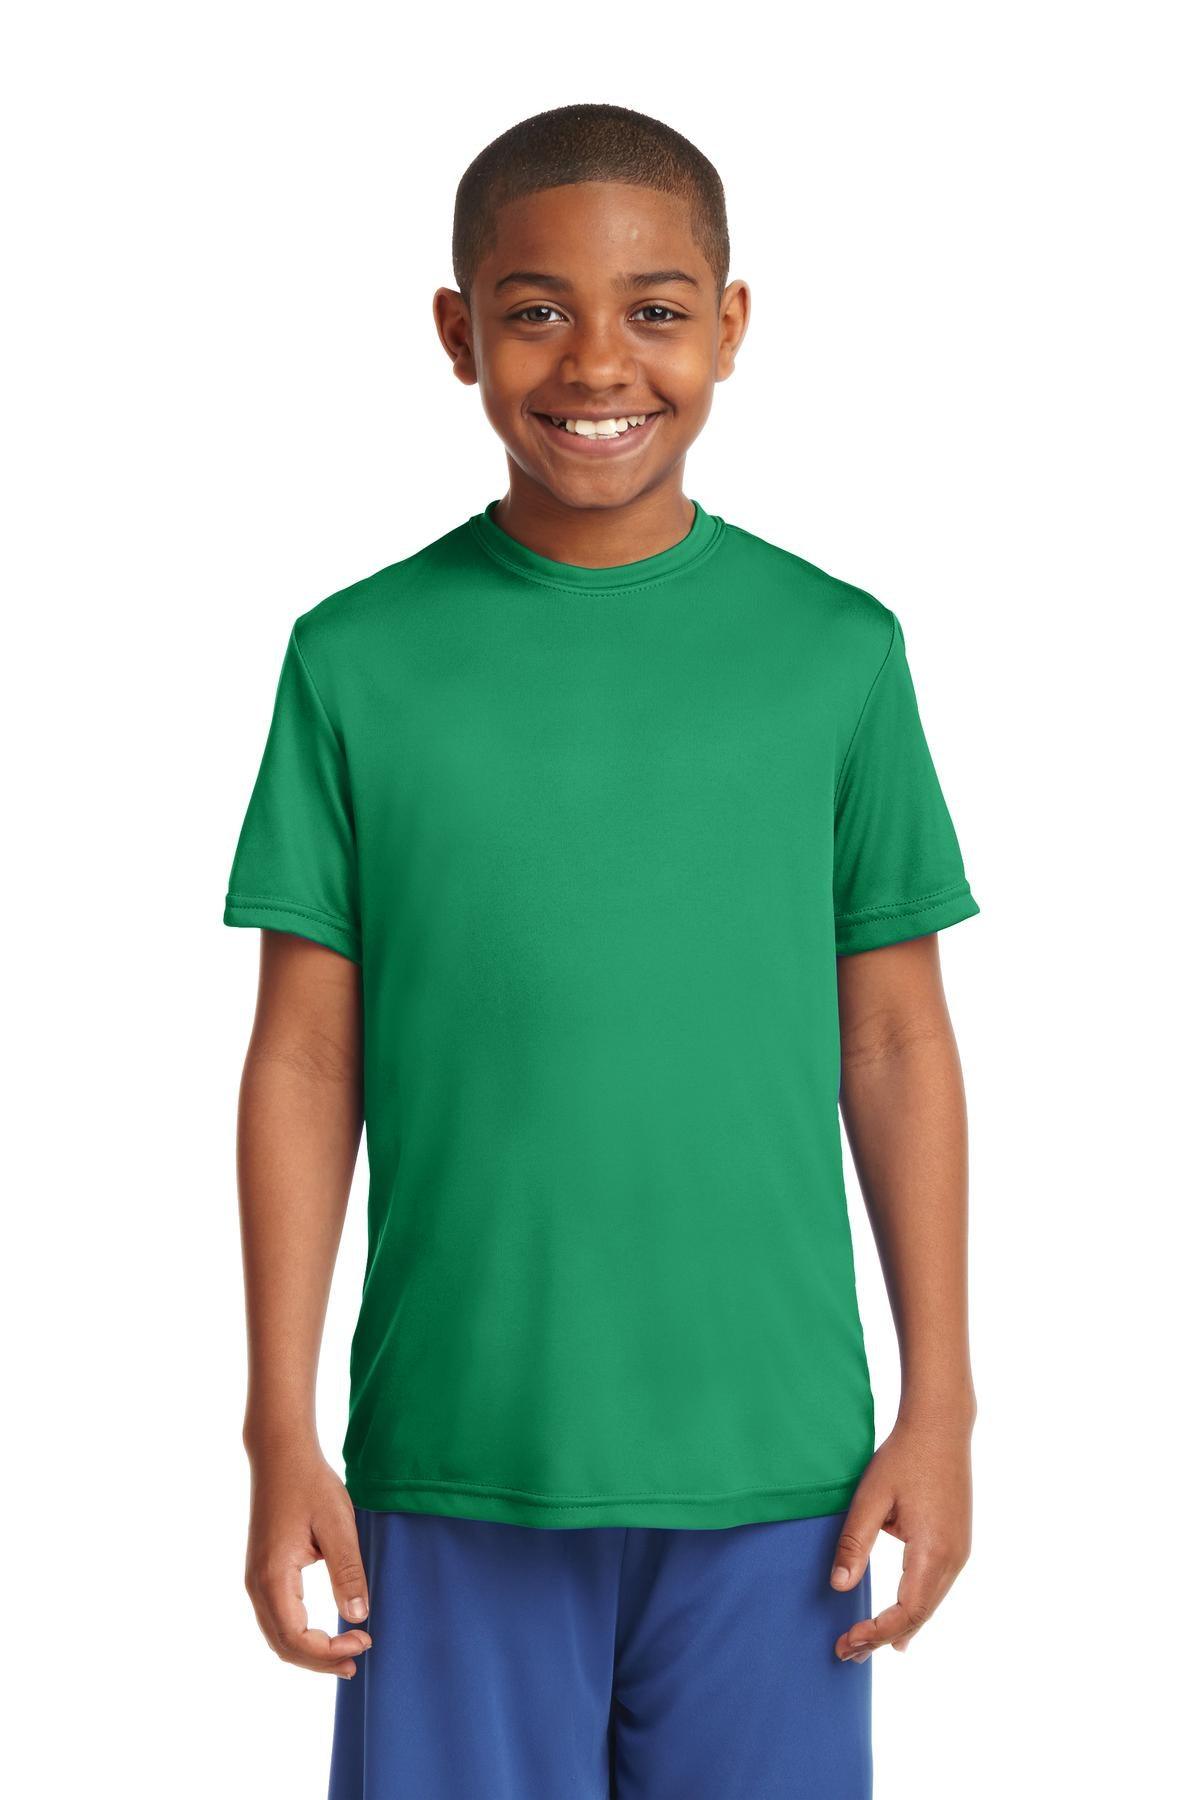 Sport-Tek Youth PosiCharge Competitor Tee. YST350 - Dresses Max